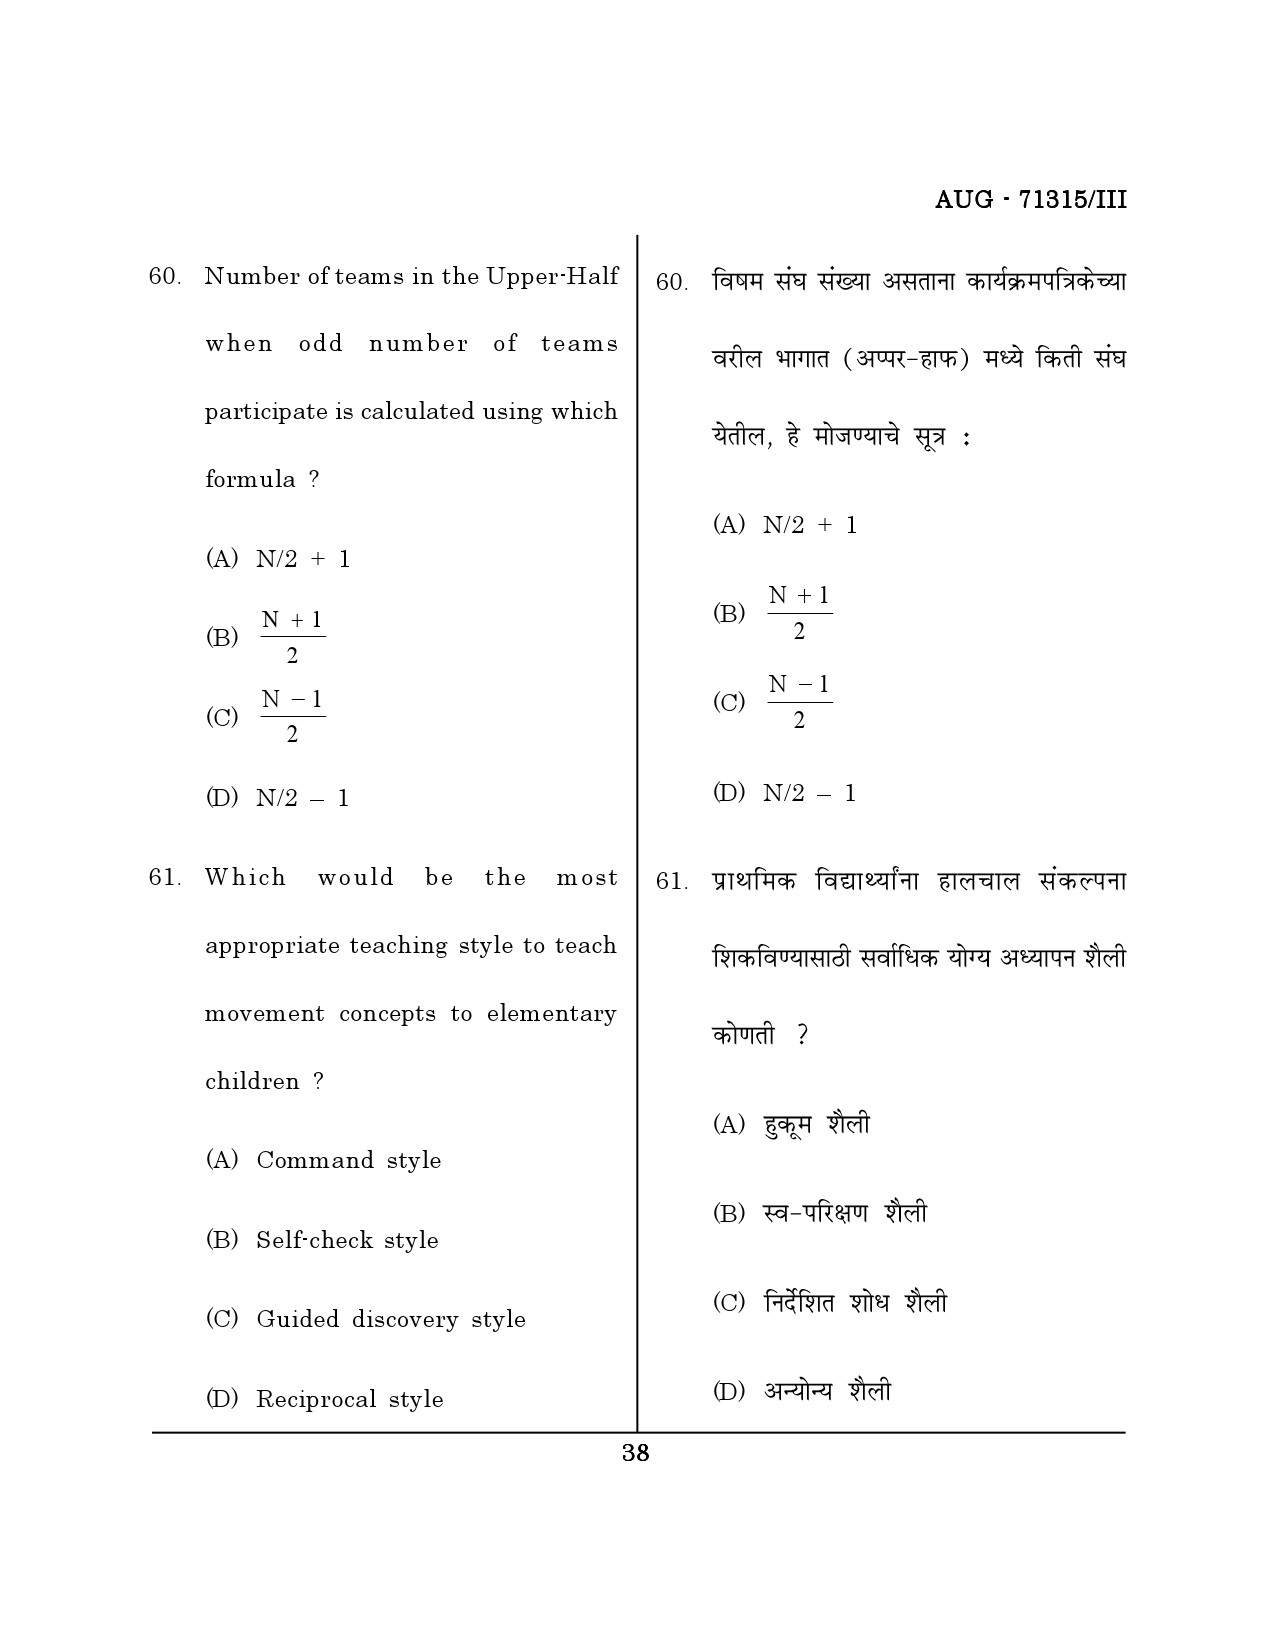 Maharashtra SET Physical Education Question Paper III August 2015 37